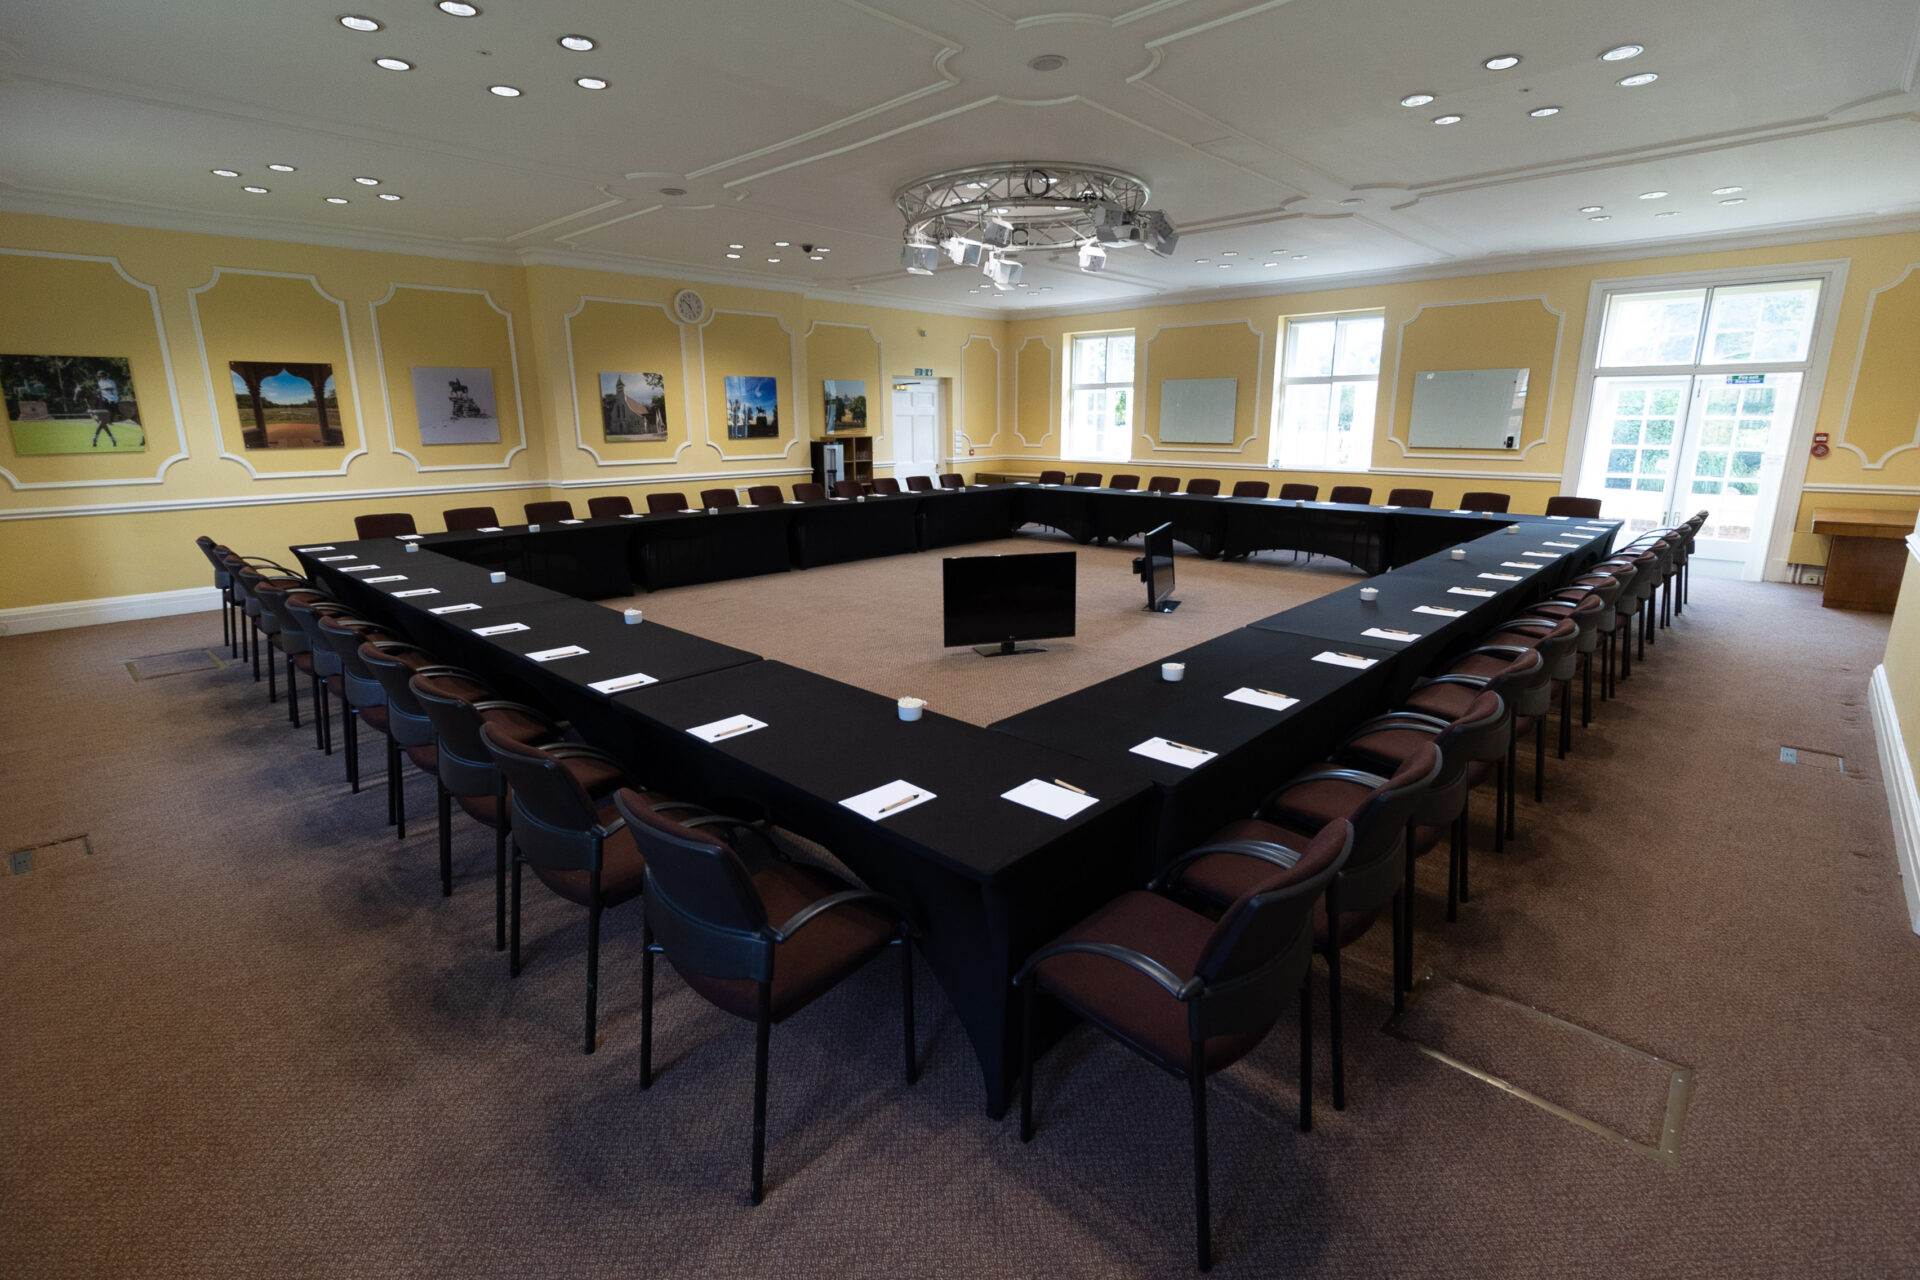 The Flitcroft conference room, set up to accommodate up to 48 people in a boardroom layout.